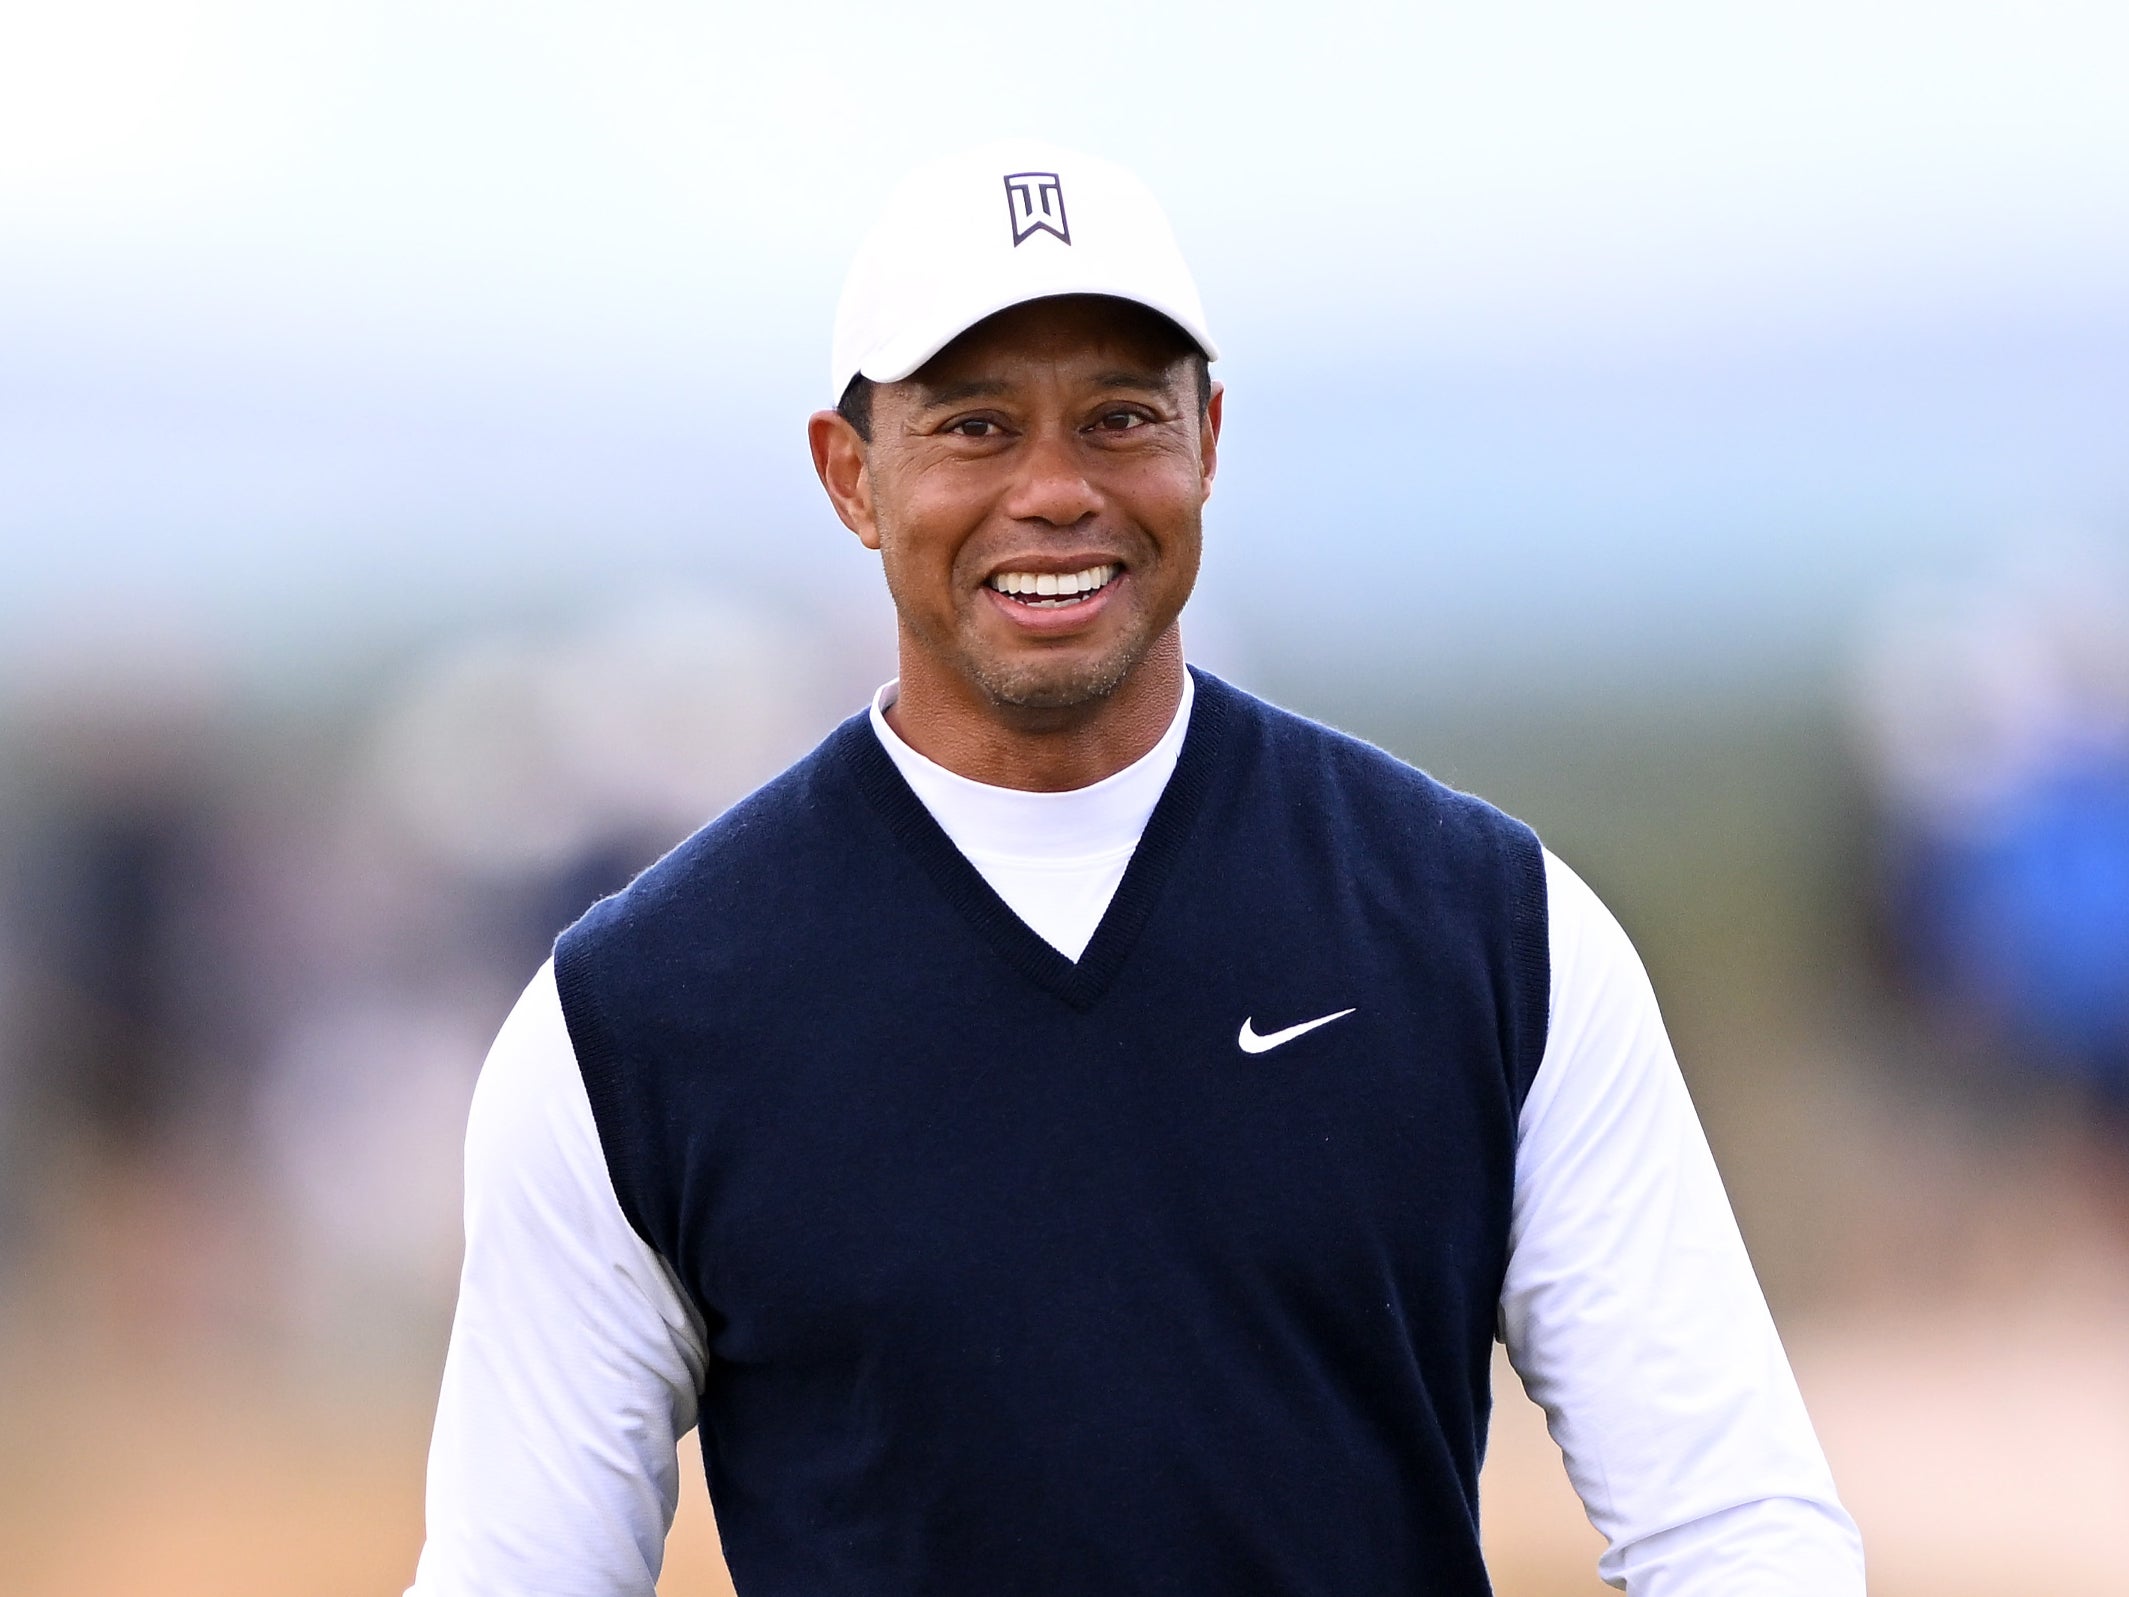 Woods has not played since the Open Championship in July